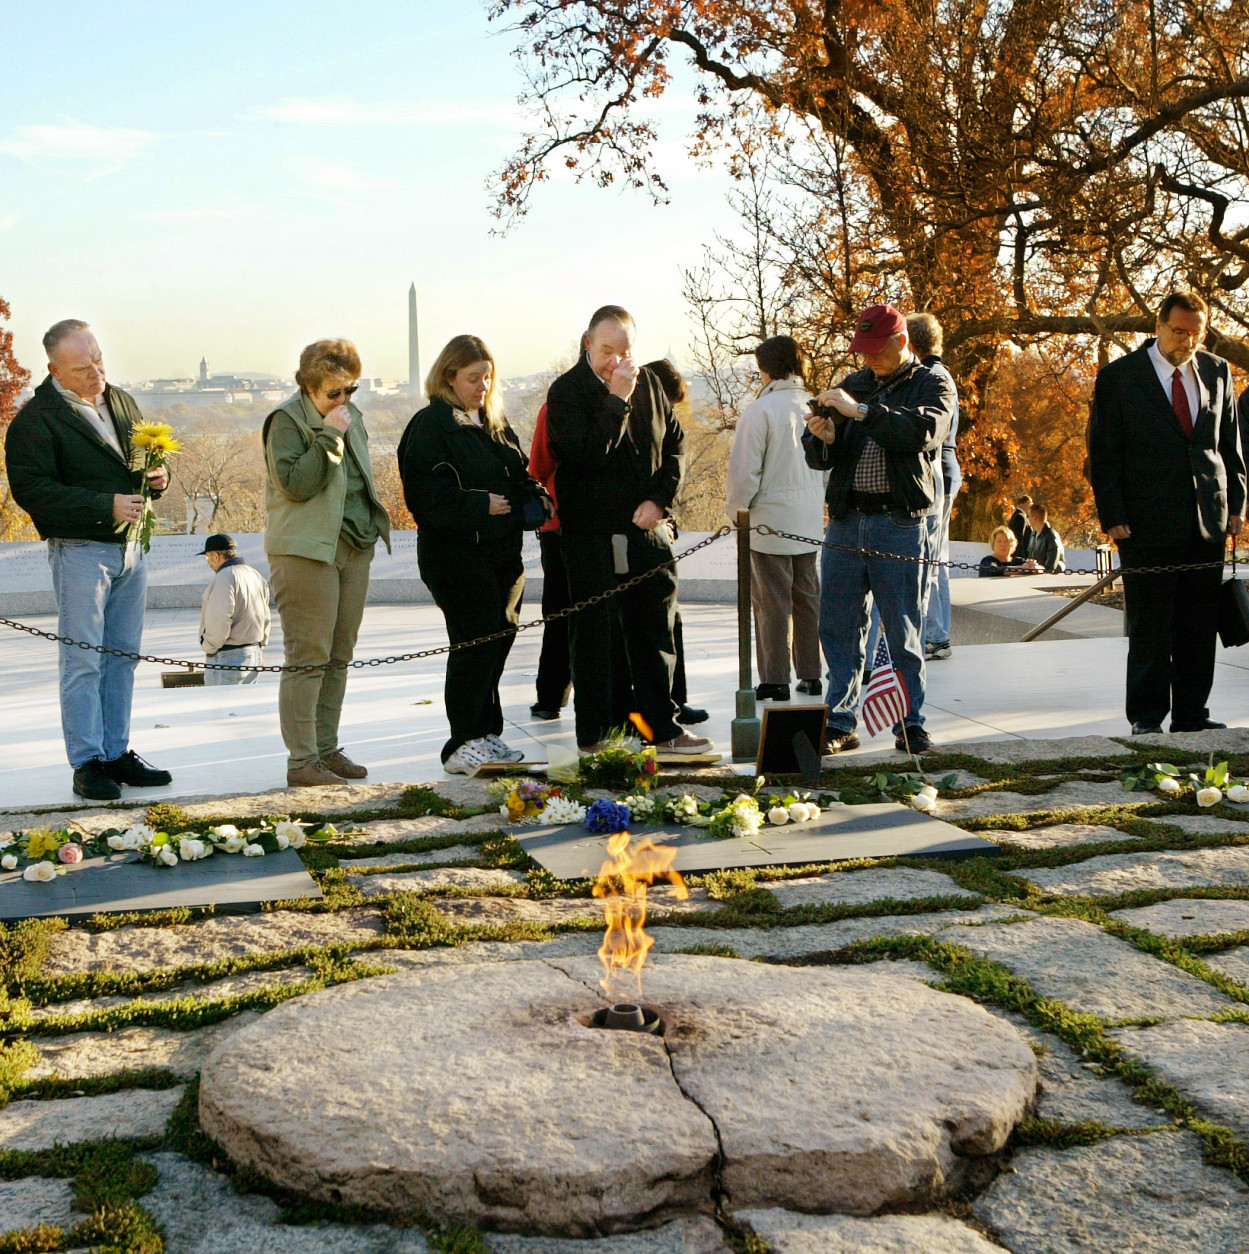 On the 40th anniversary of the assassination of President John F. Kennedy in Dallas, visitors pay their respects at Kennedy's gravesite in Arlington National Cemetery in Arlington, Va., Saturday, Nov. 22, 2003. Members of the slain president's family visited in private at dawn before the cemetery was opened to the public.  (AP Photo/J. Scott Applewhite)